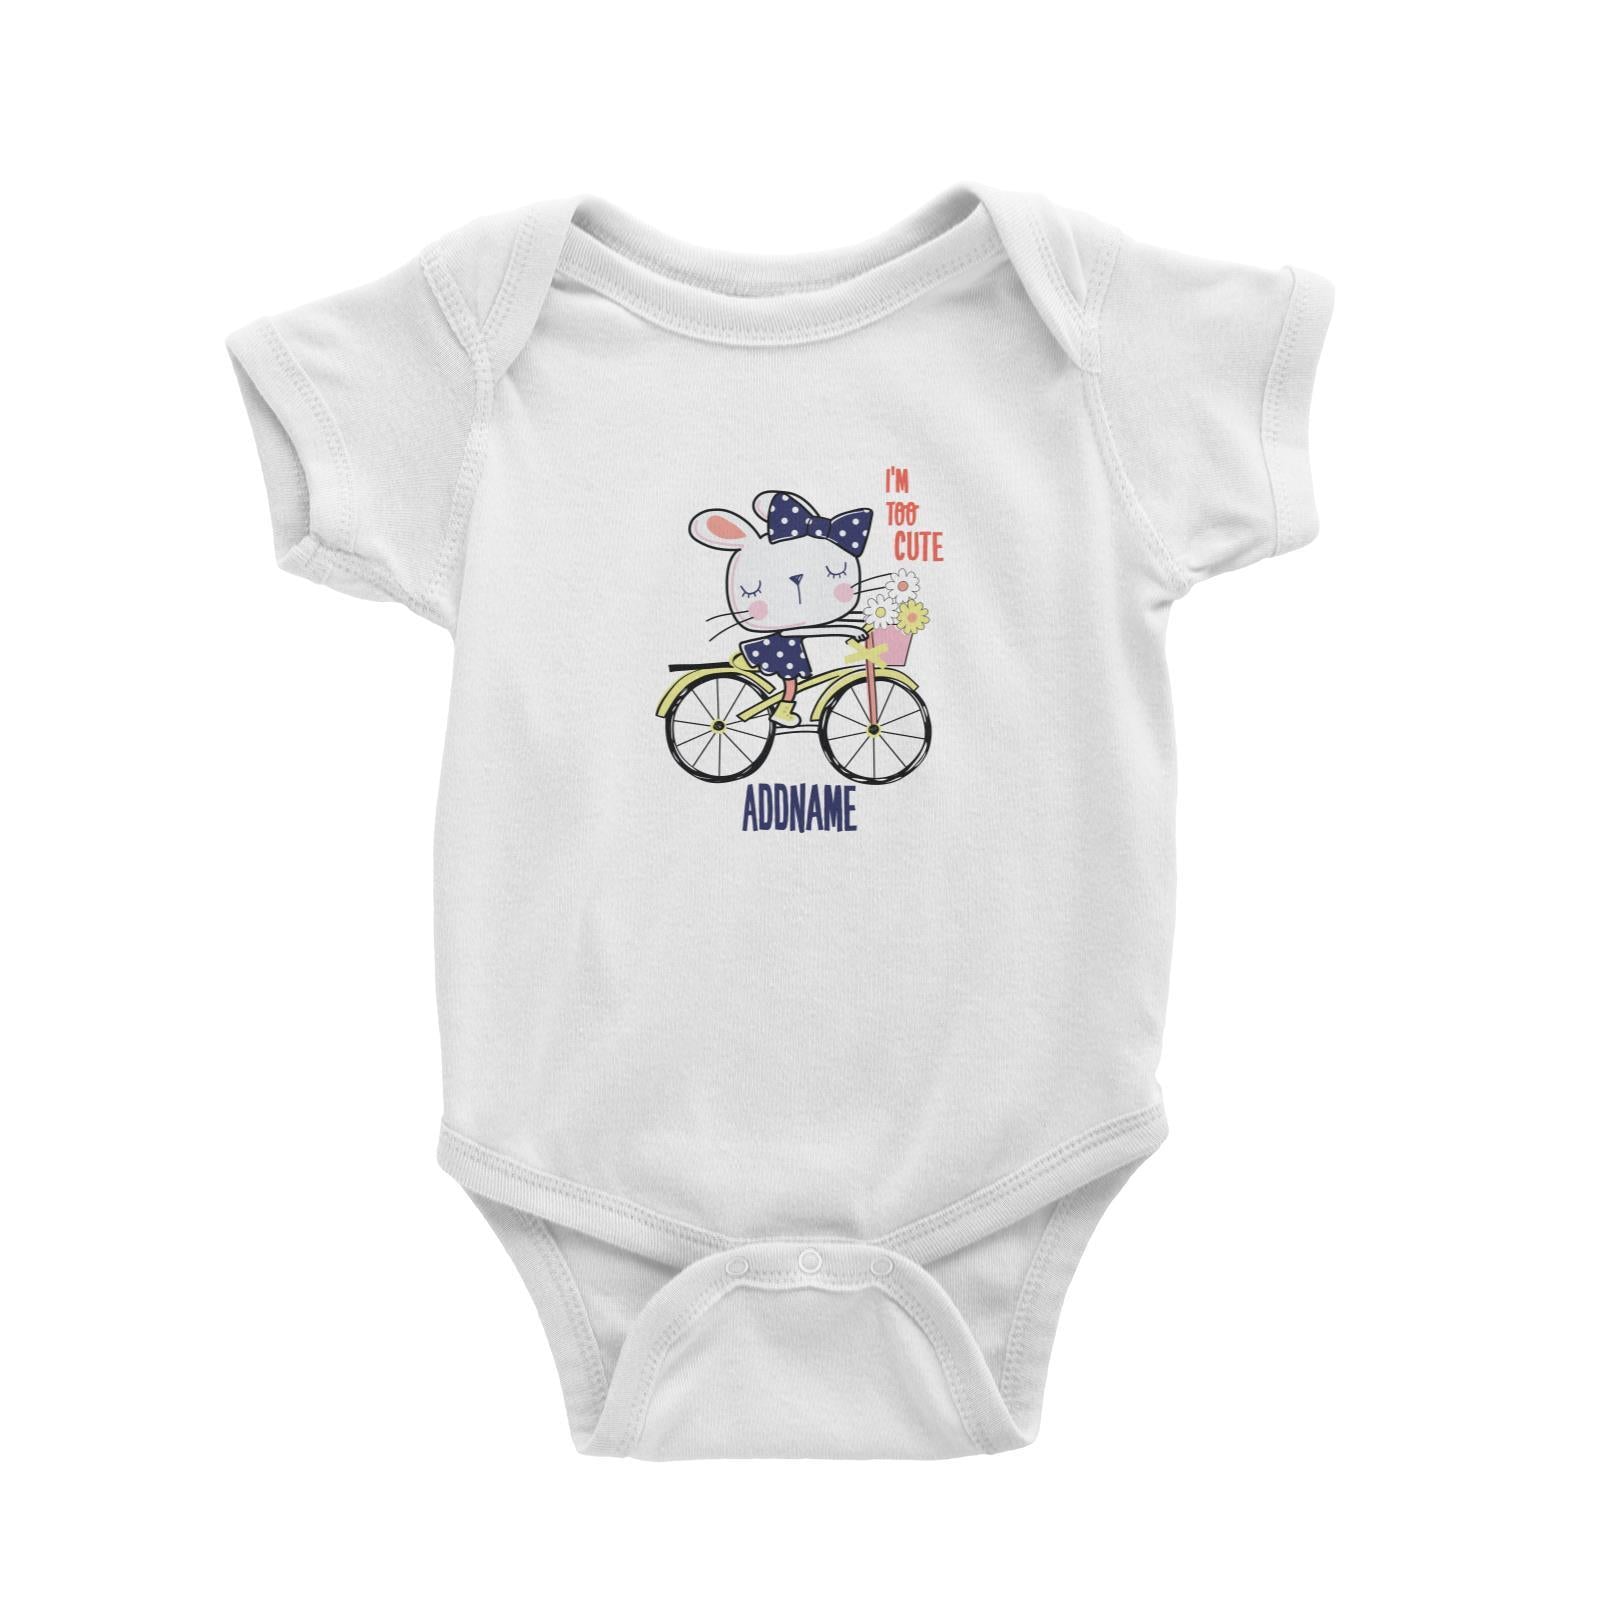 Cool Vibrant Series I'm Too Cute Bunny on Bicycle Addname Baby Romper